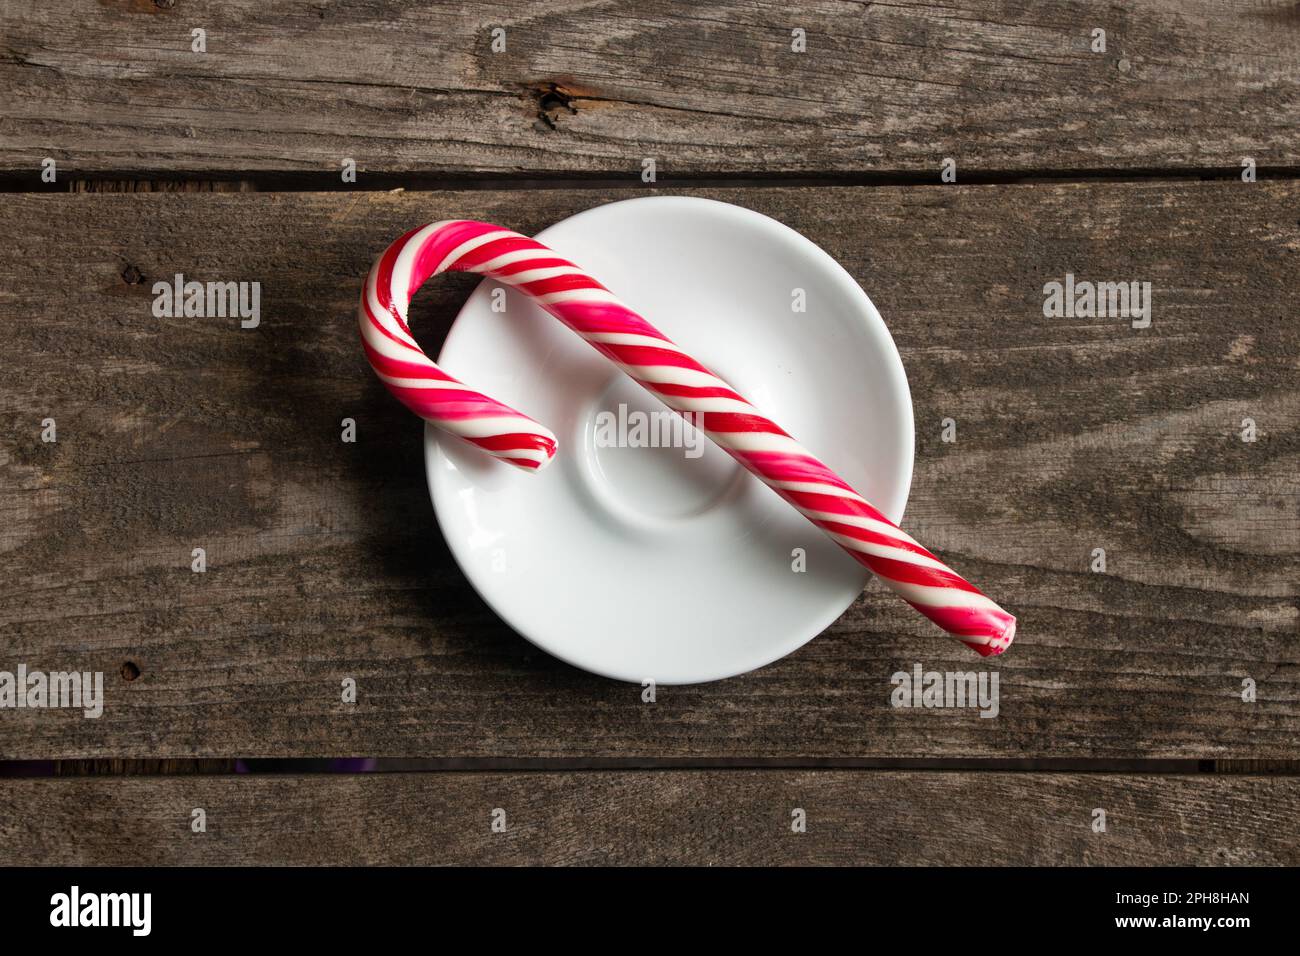 New Year's caramel in the form of a cane in red and white stripes lies on a plate on the table, New Year's decor Stock Photo